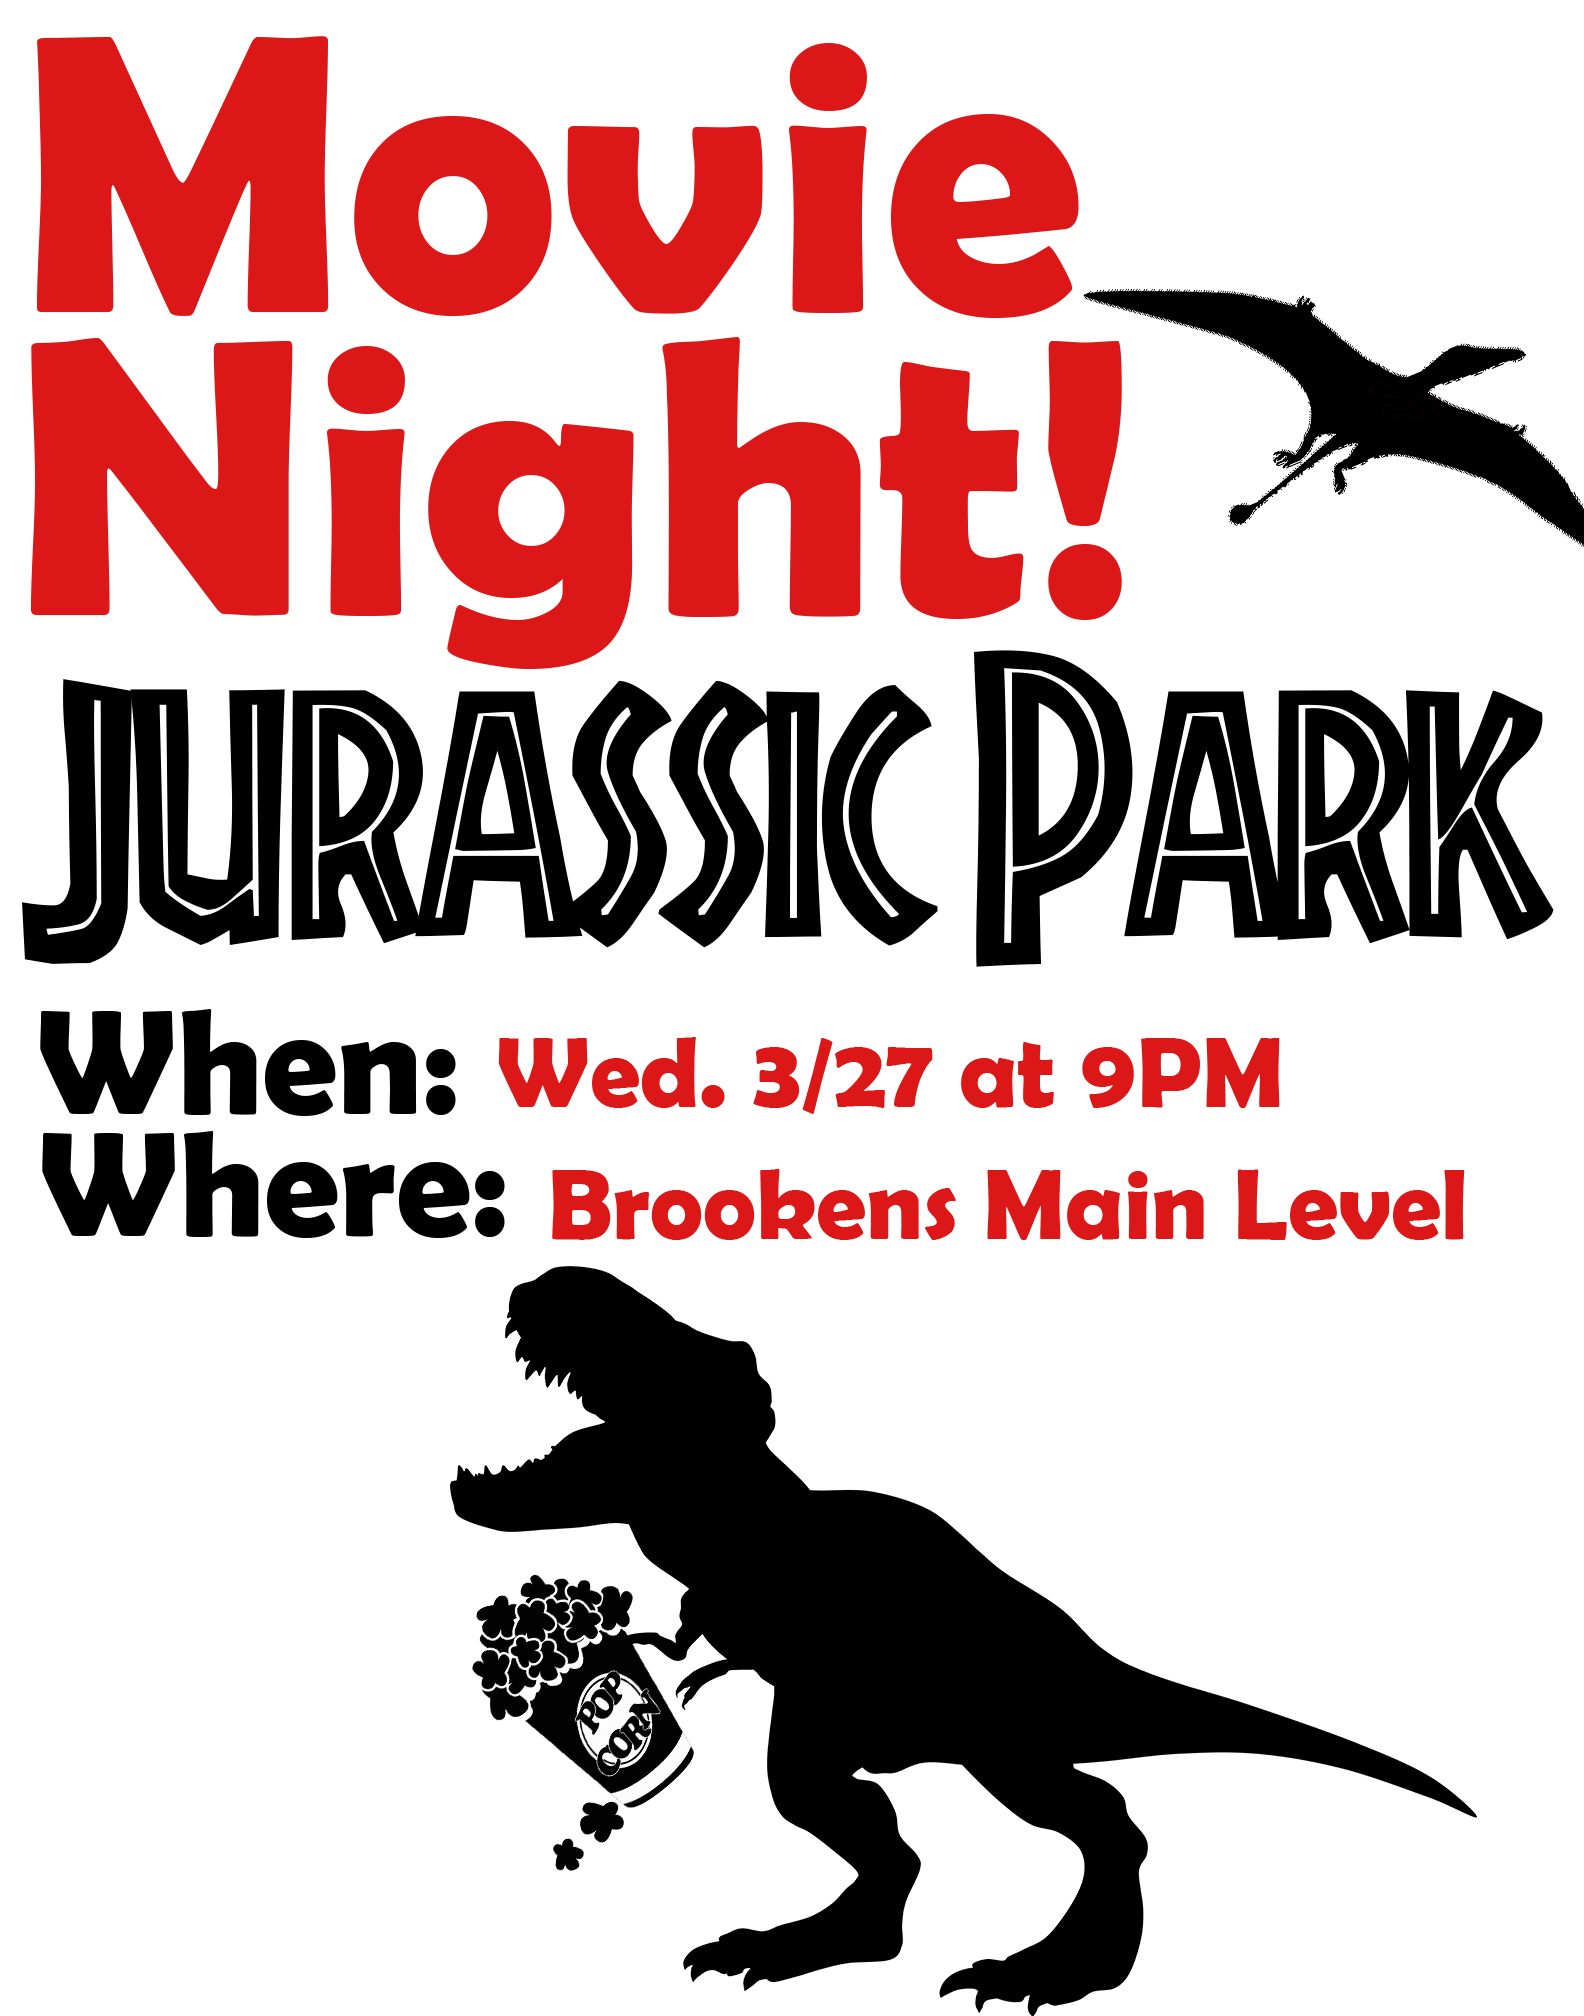 Image of movie night advertisement indicating that Movie Night at the Library is on Wednesday march 27th at 9pm on the main level of the library. 